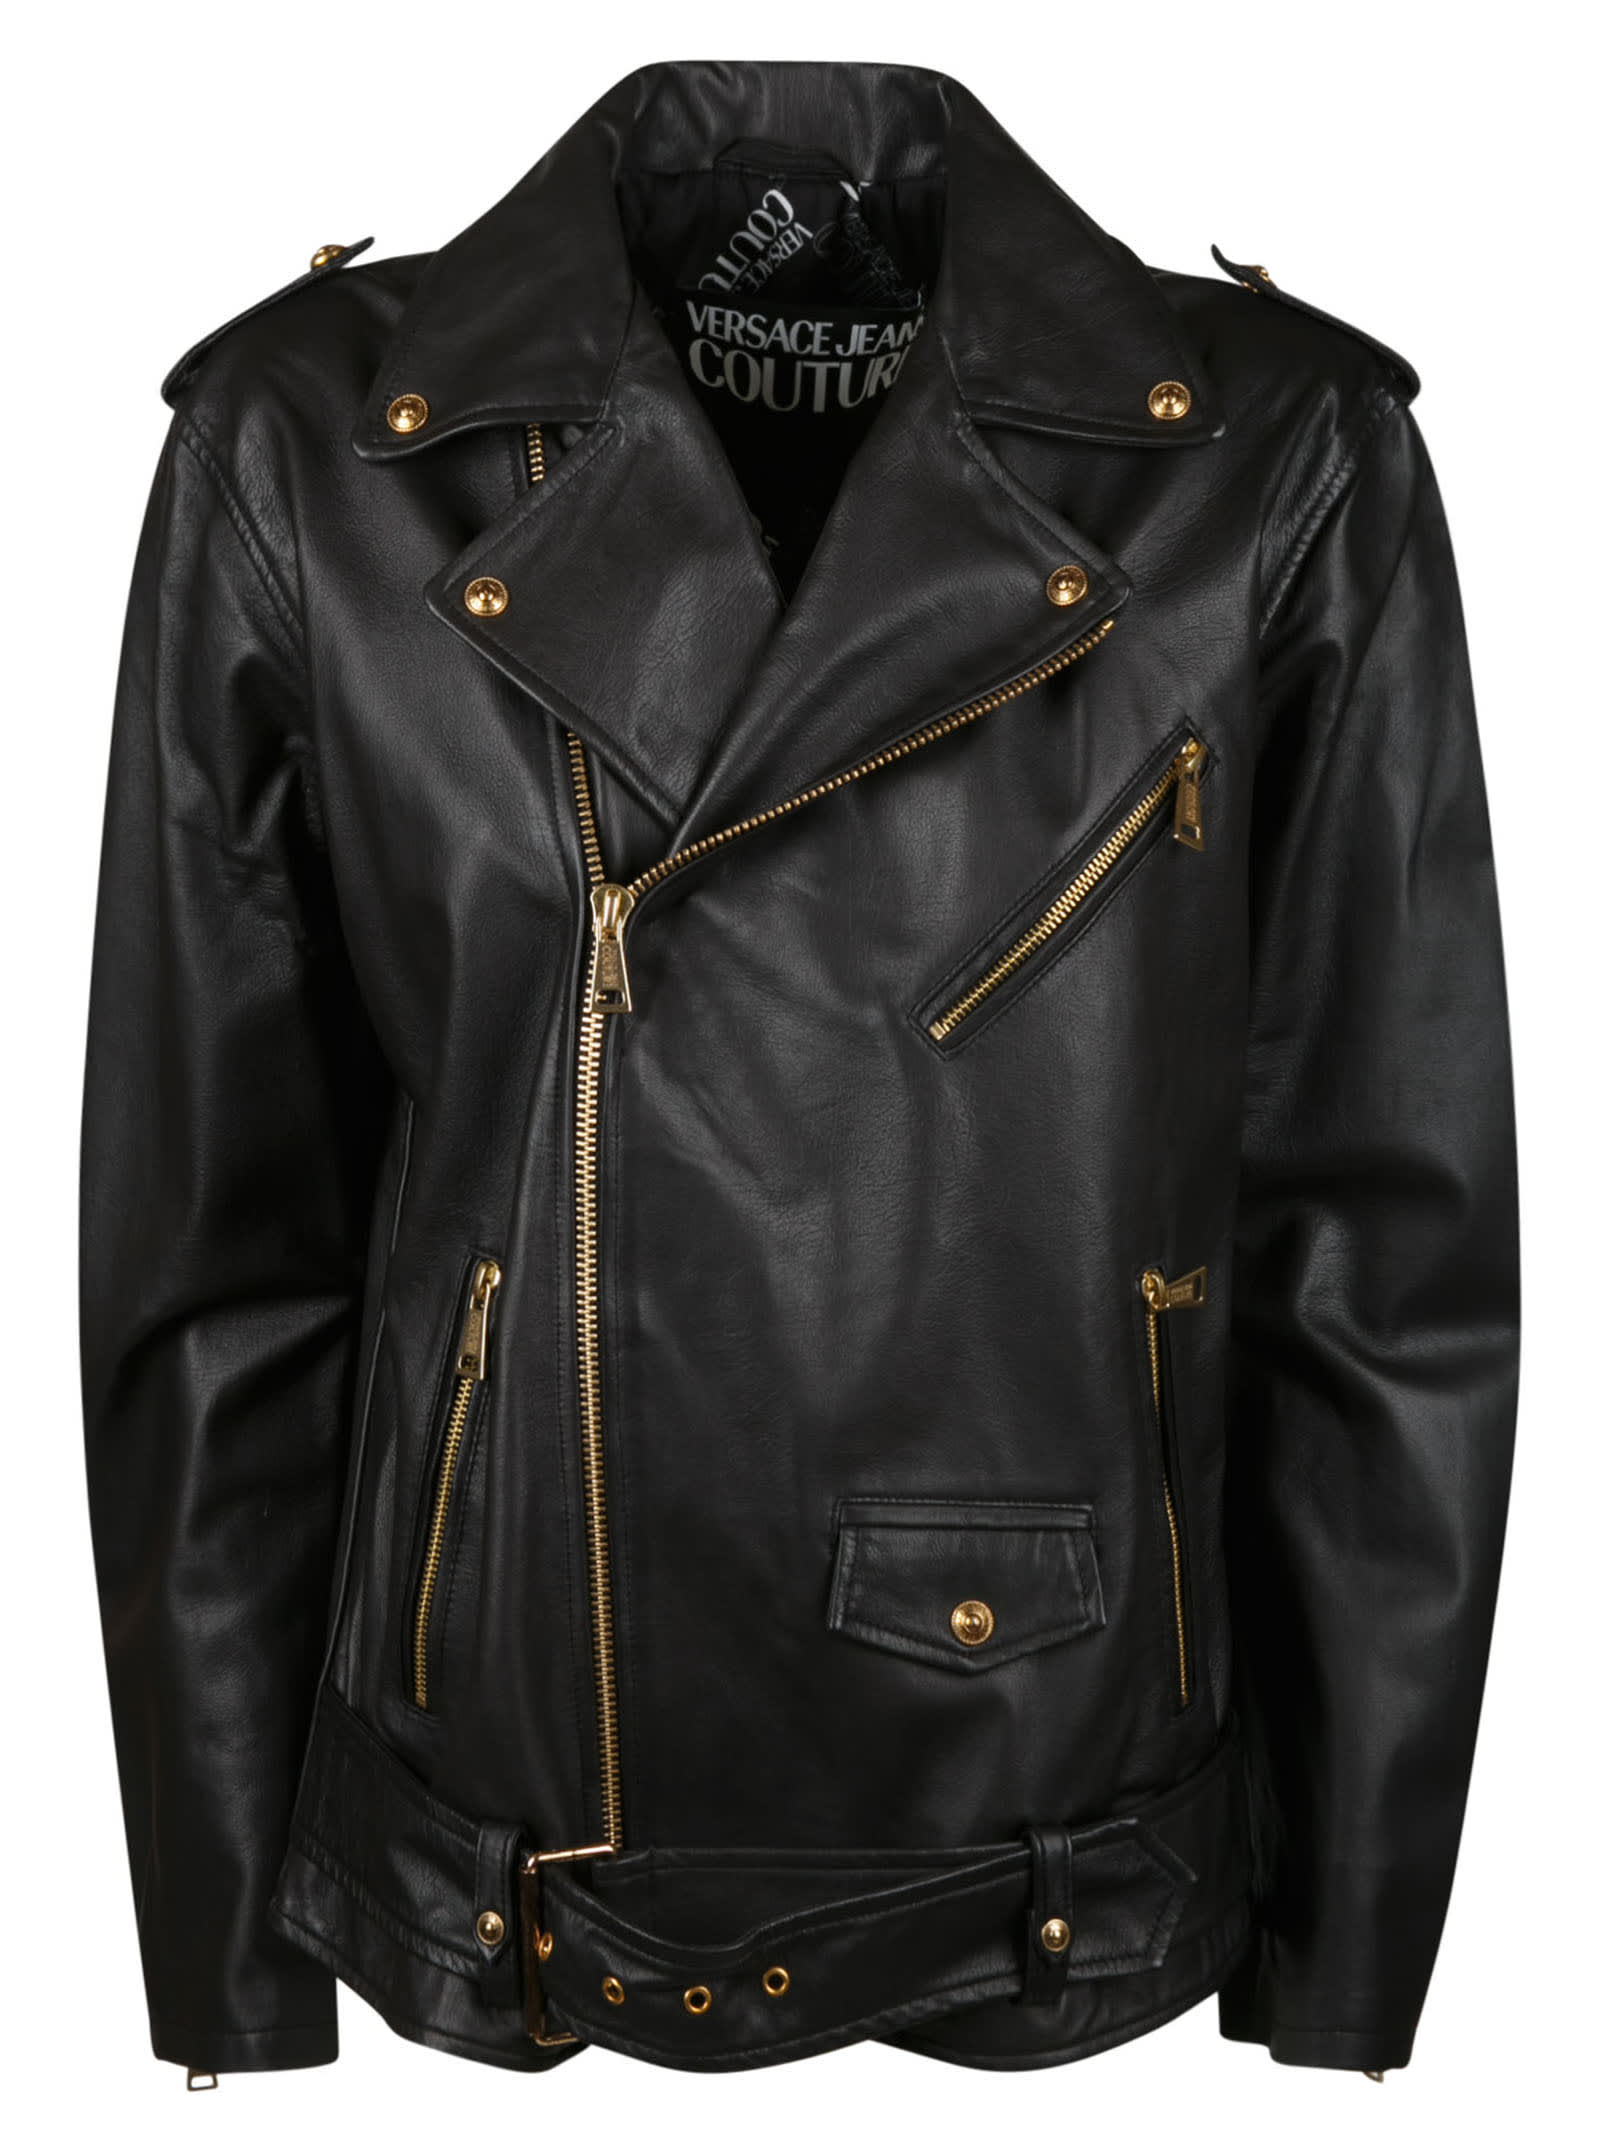 Versace Jeans Couture Belted Waist Couture Biker Jacket